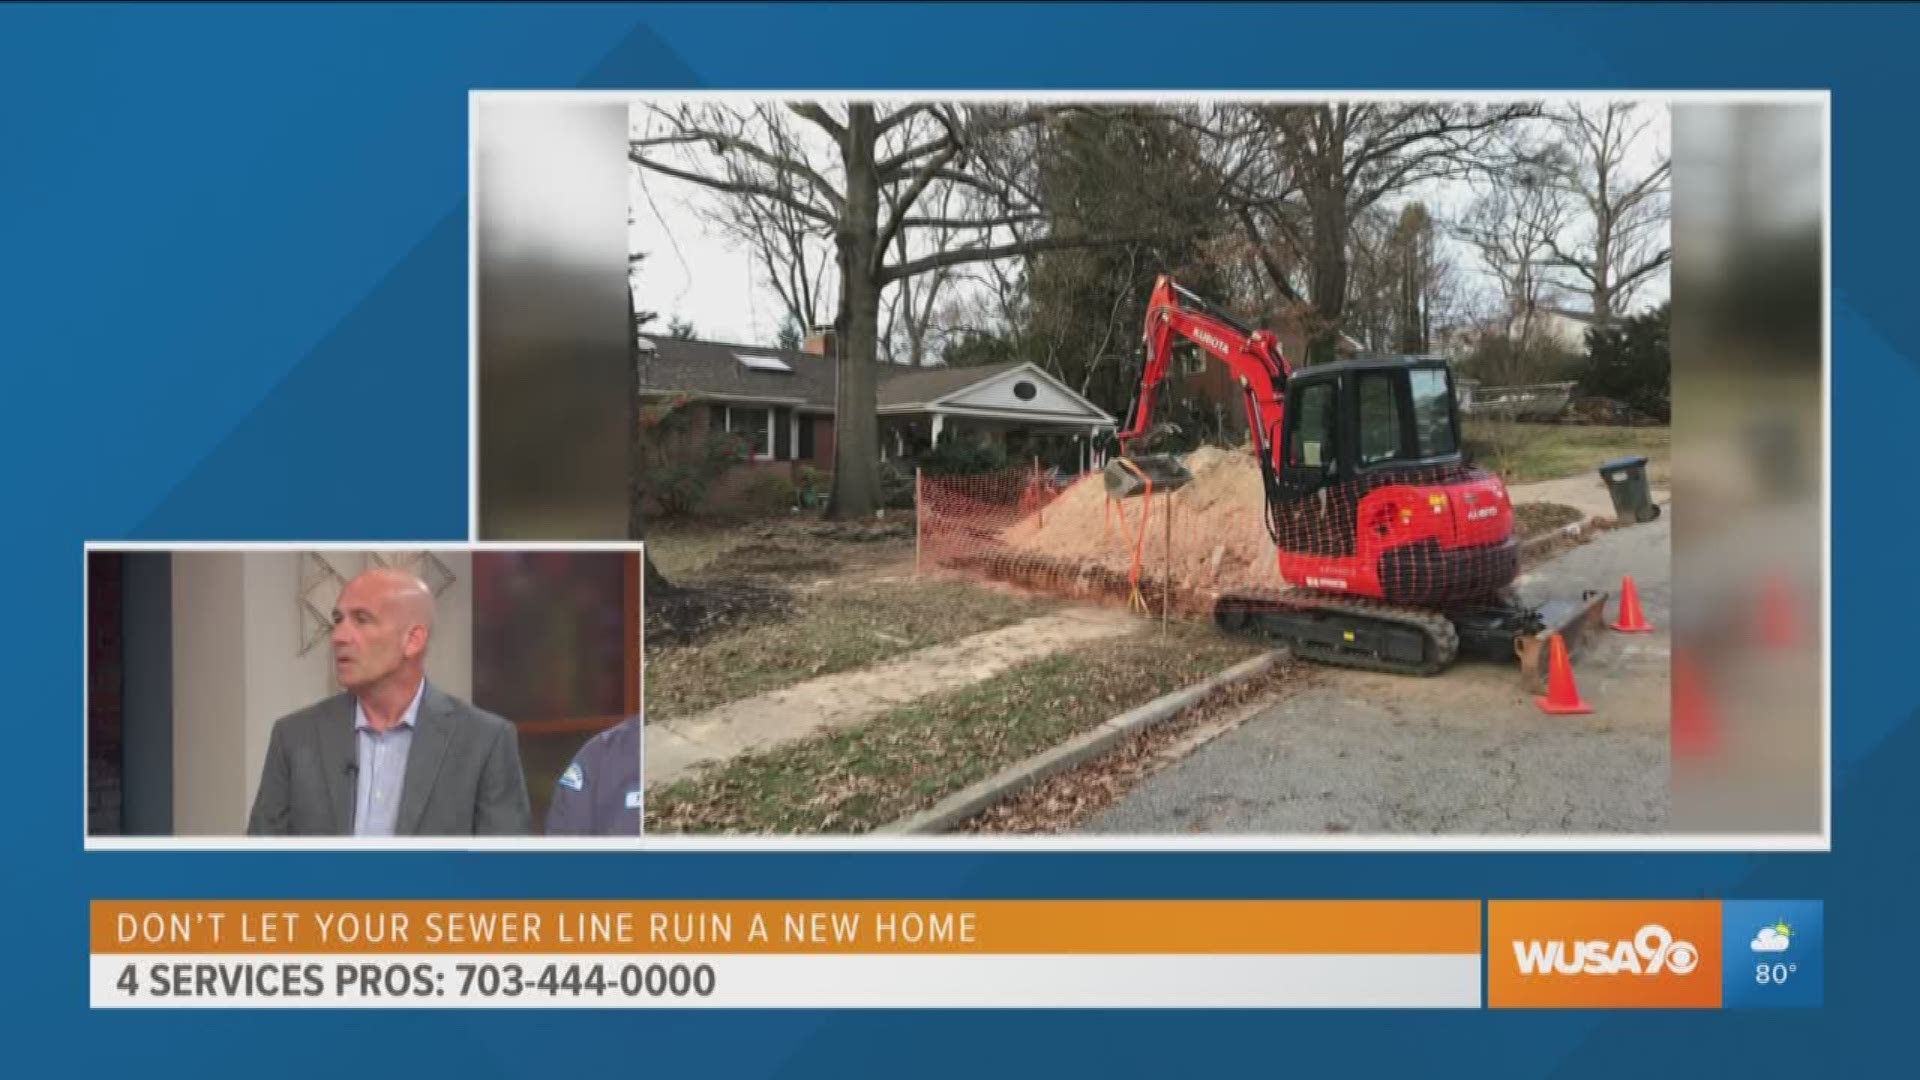 The following segment is sponsored by 4 Service Pros. Greg Schick, President of 4 Service Pros and Senior Technician Tyriece Walker, share how they can help you maintain your sewer line and avoid costly repairs. For more information and a special deal call 703-444-0000 or go to www.4servicepros.com.